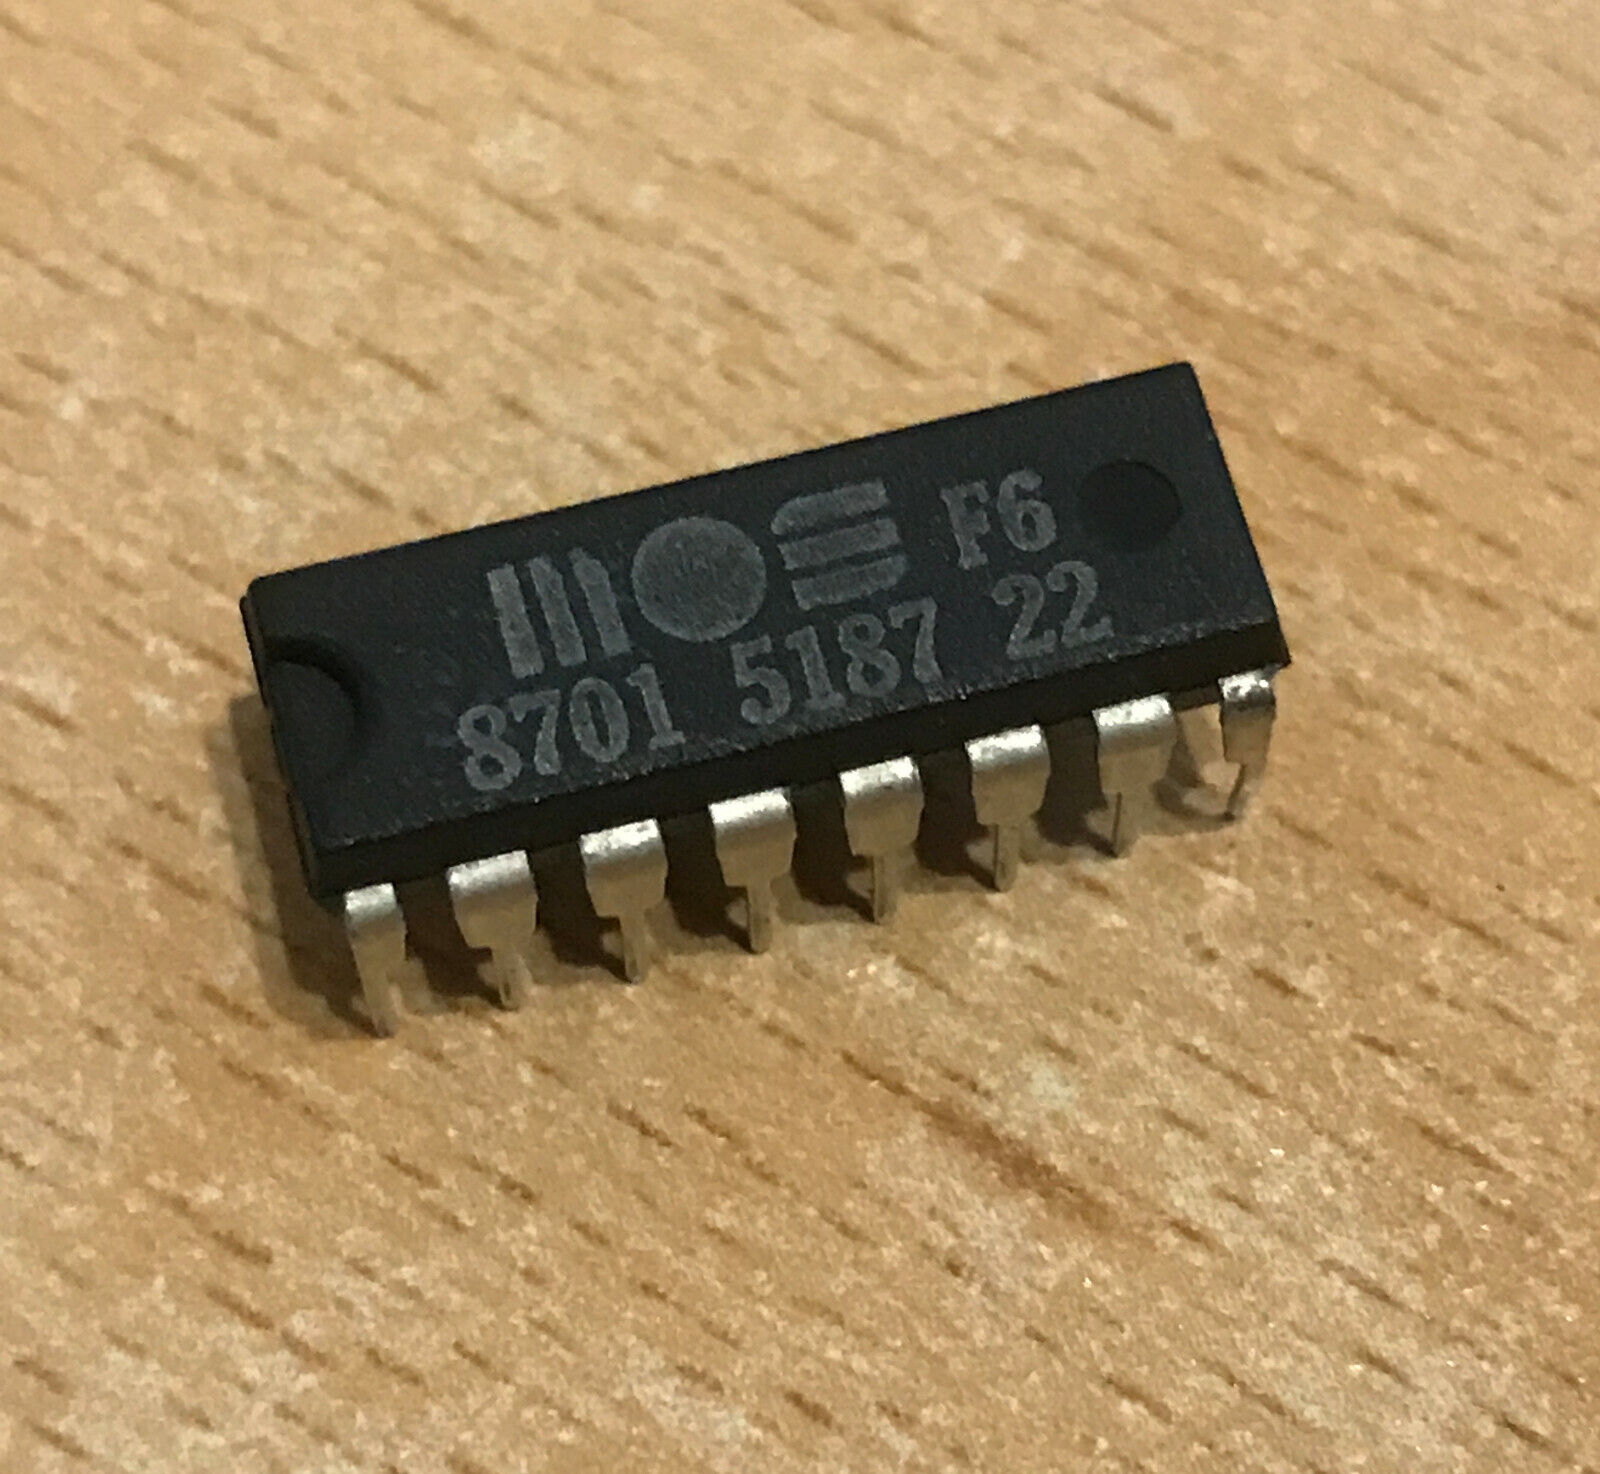 8701 (2x) Timing Chip Ic for Commodore C64/C128, Mos #03